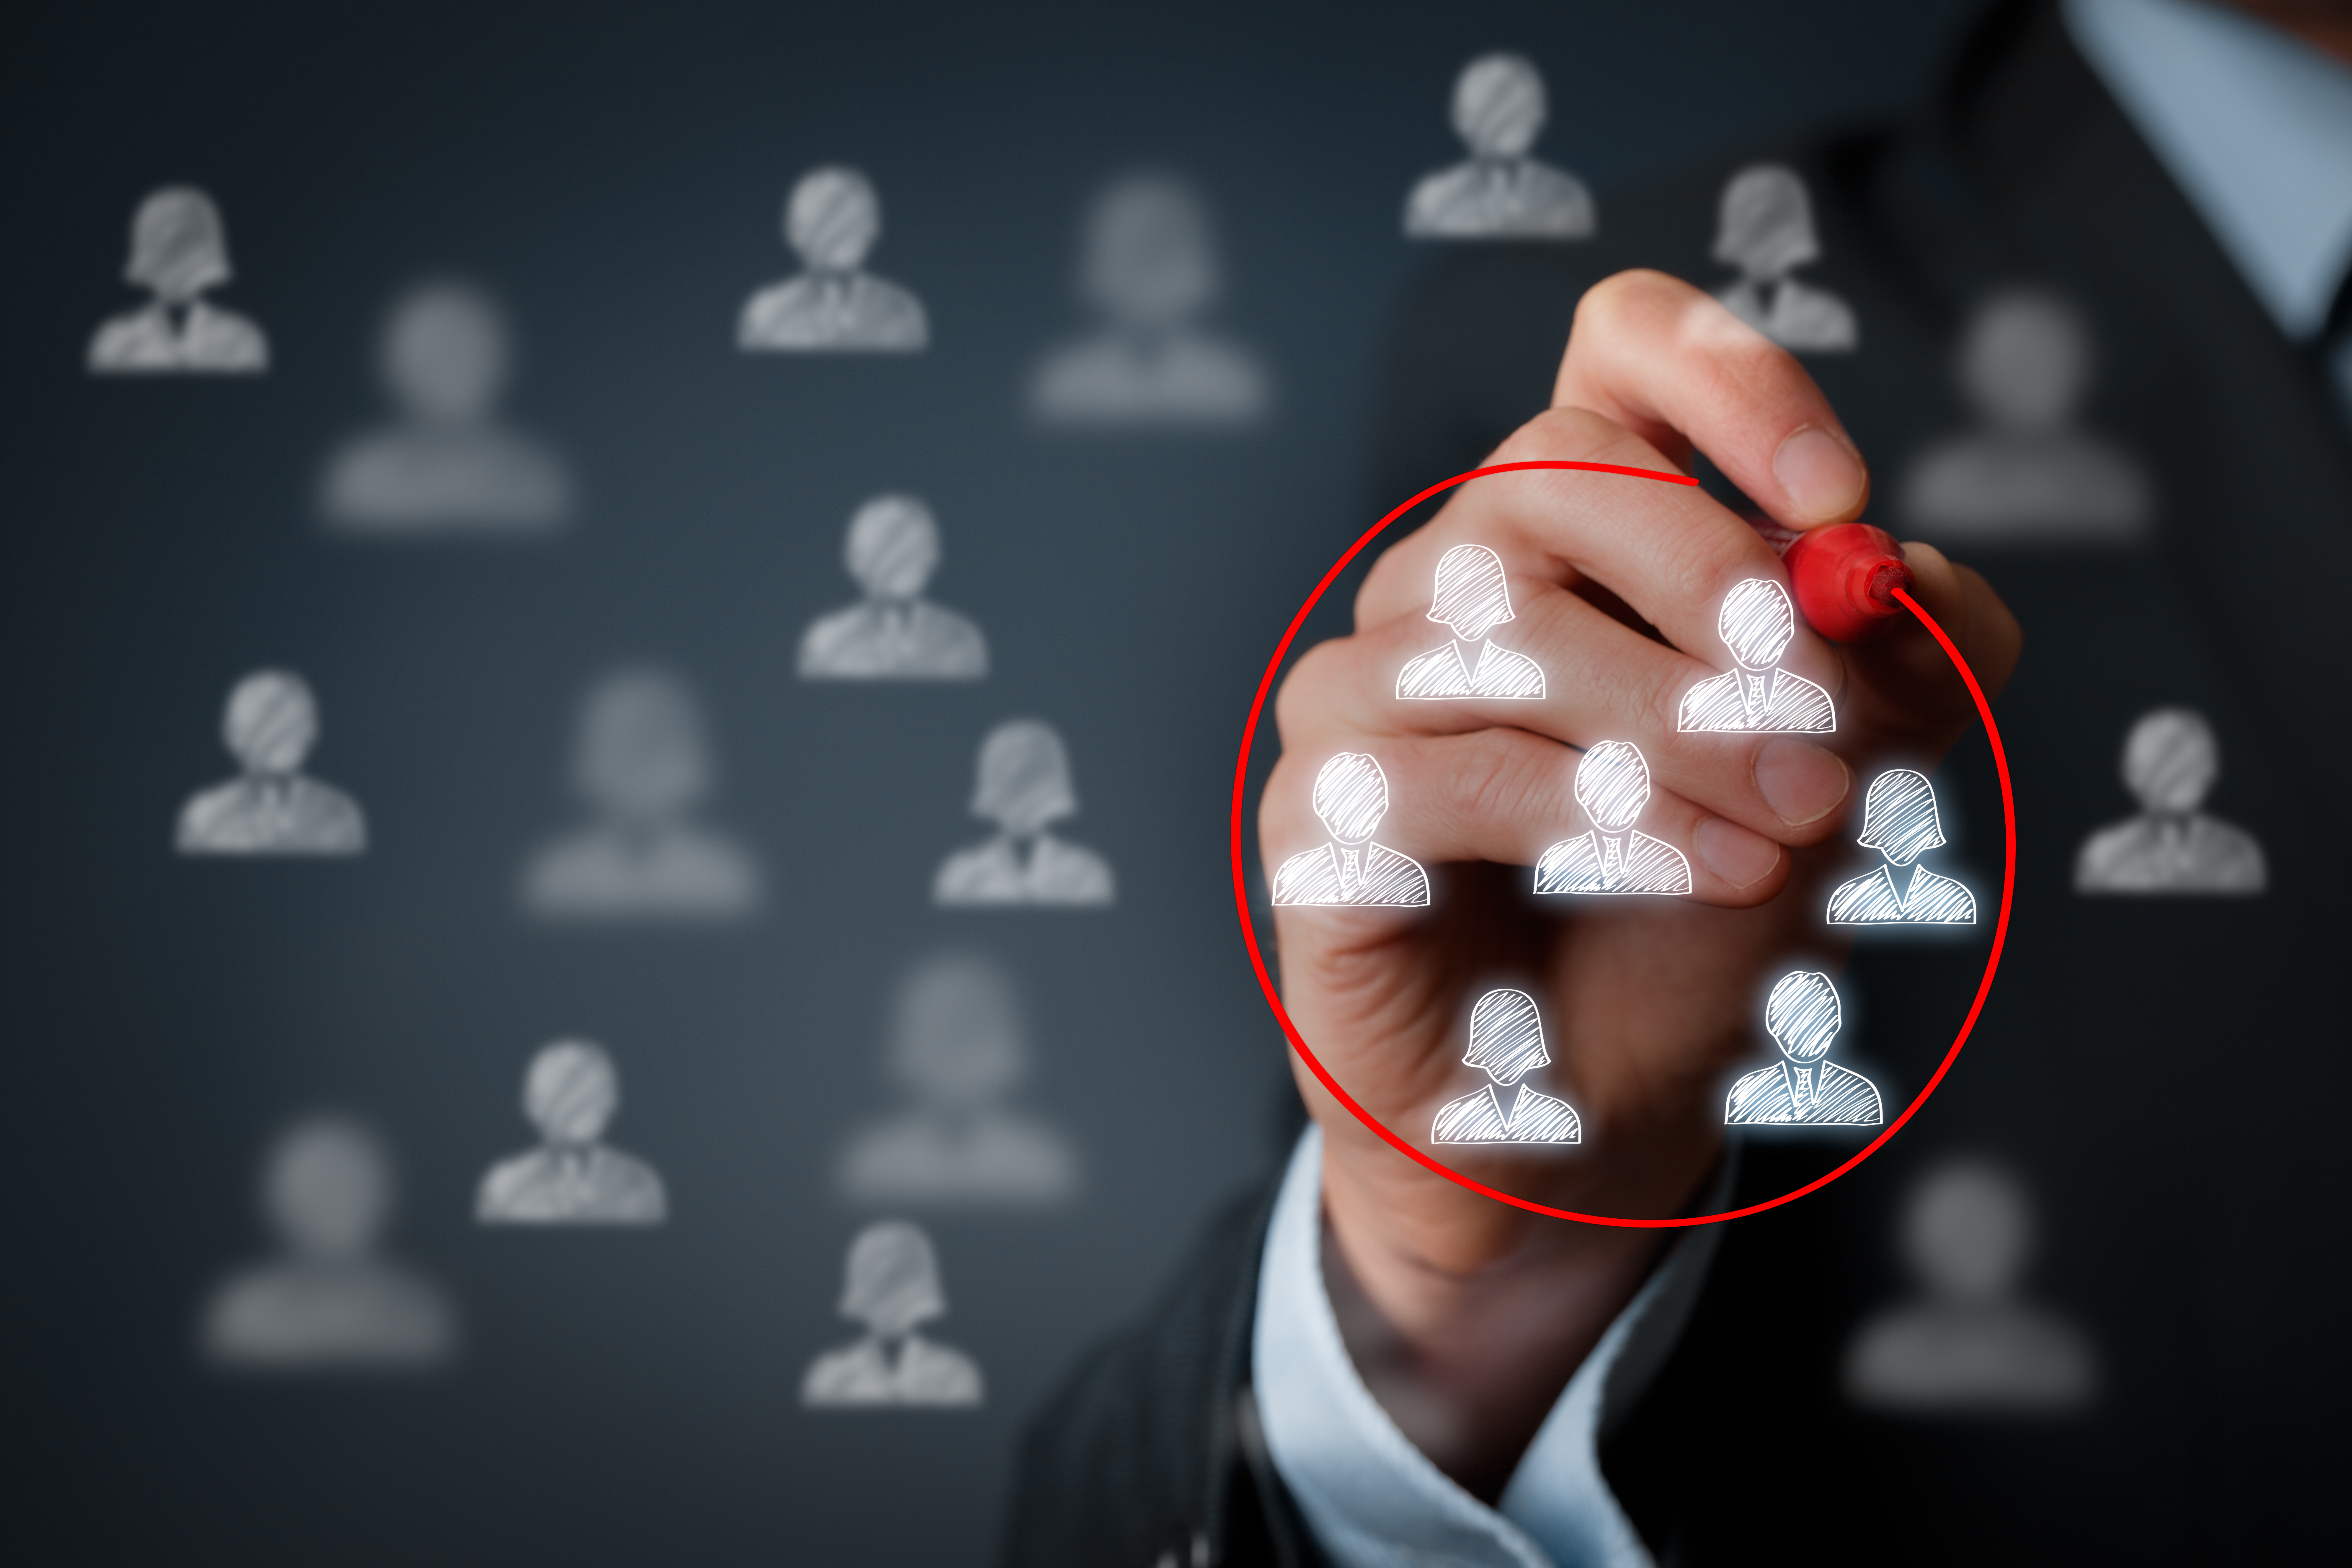 Marketing Personalization: How to Leverage Data to Reach Audiences